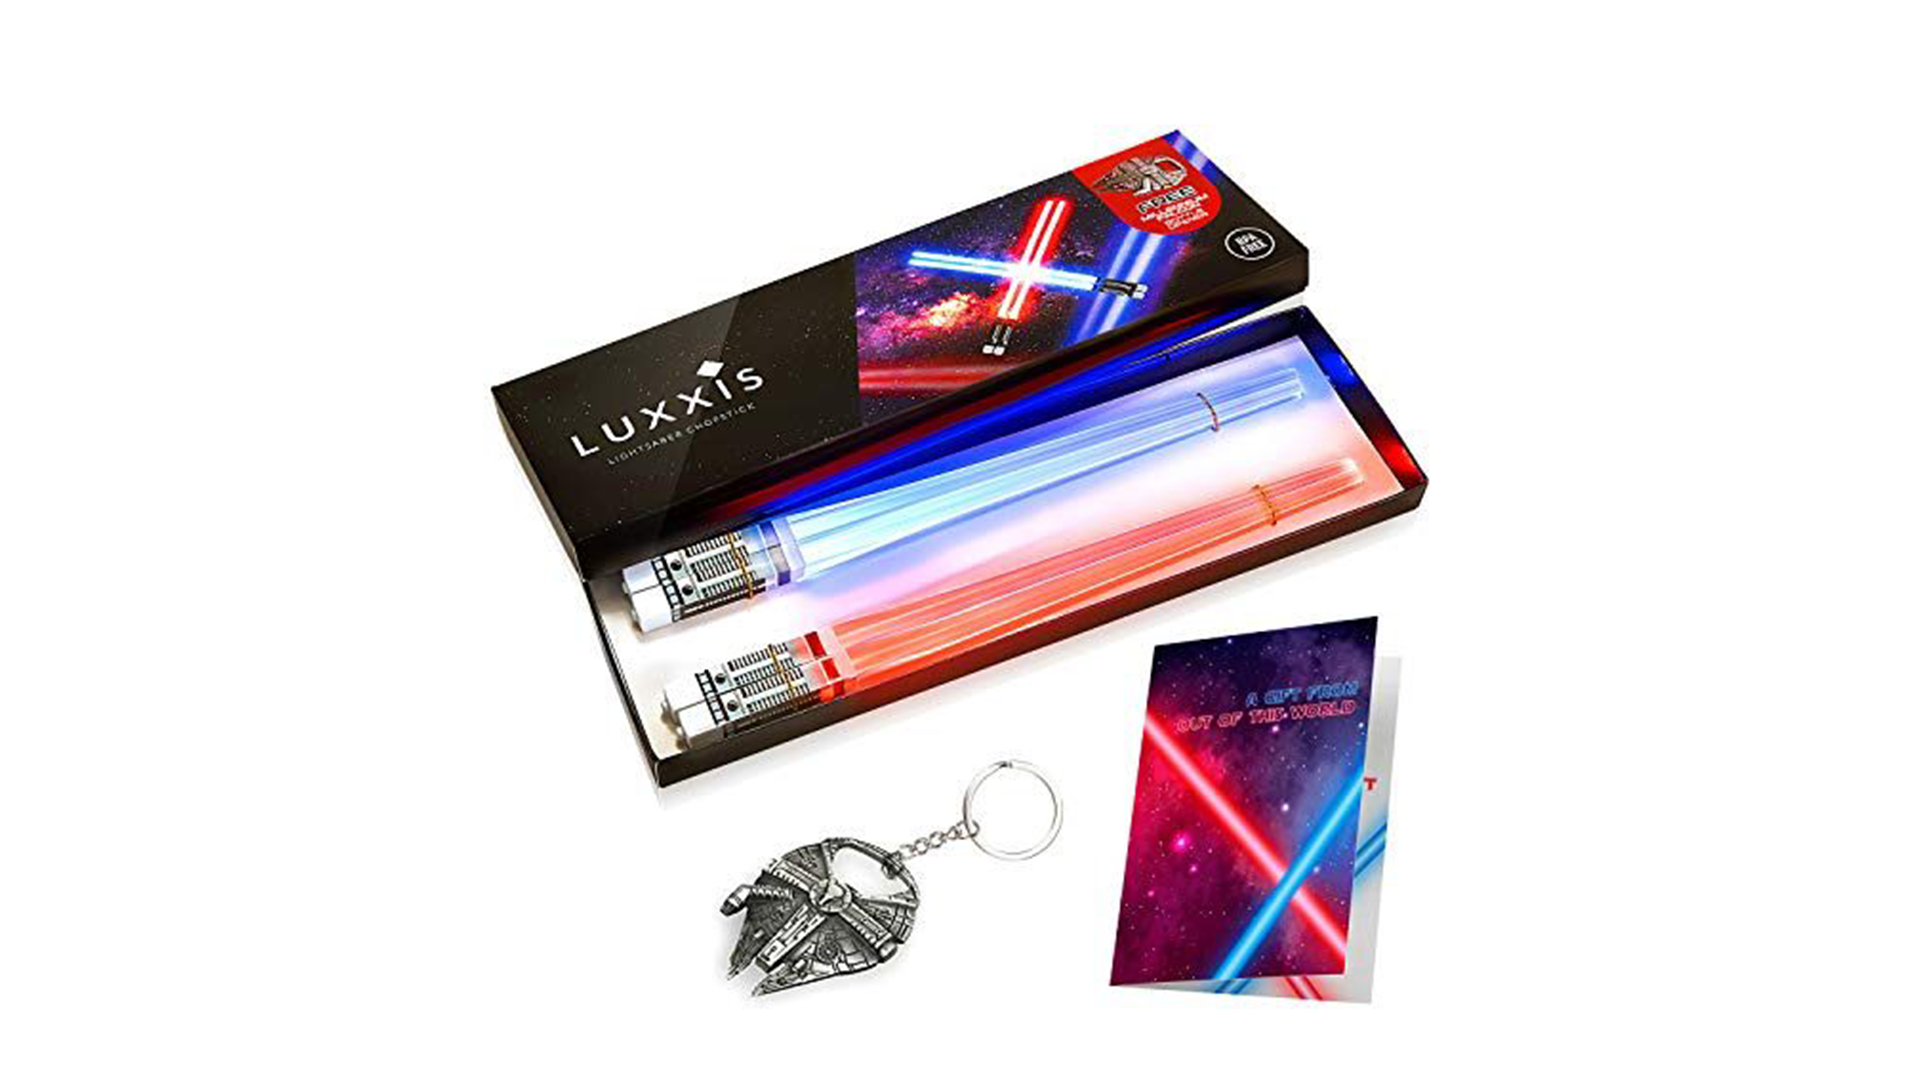 An open box containing two pairs of lightsabre chopsticks – one red and one blue. Below is a Millennium Falcon keyring and a card with crossed red and blue lightsabres on the front.